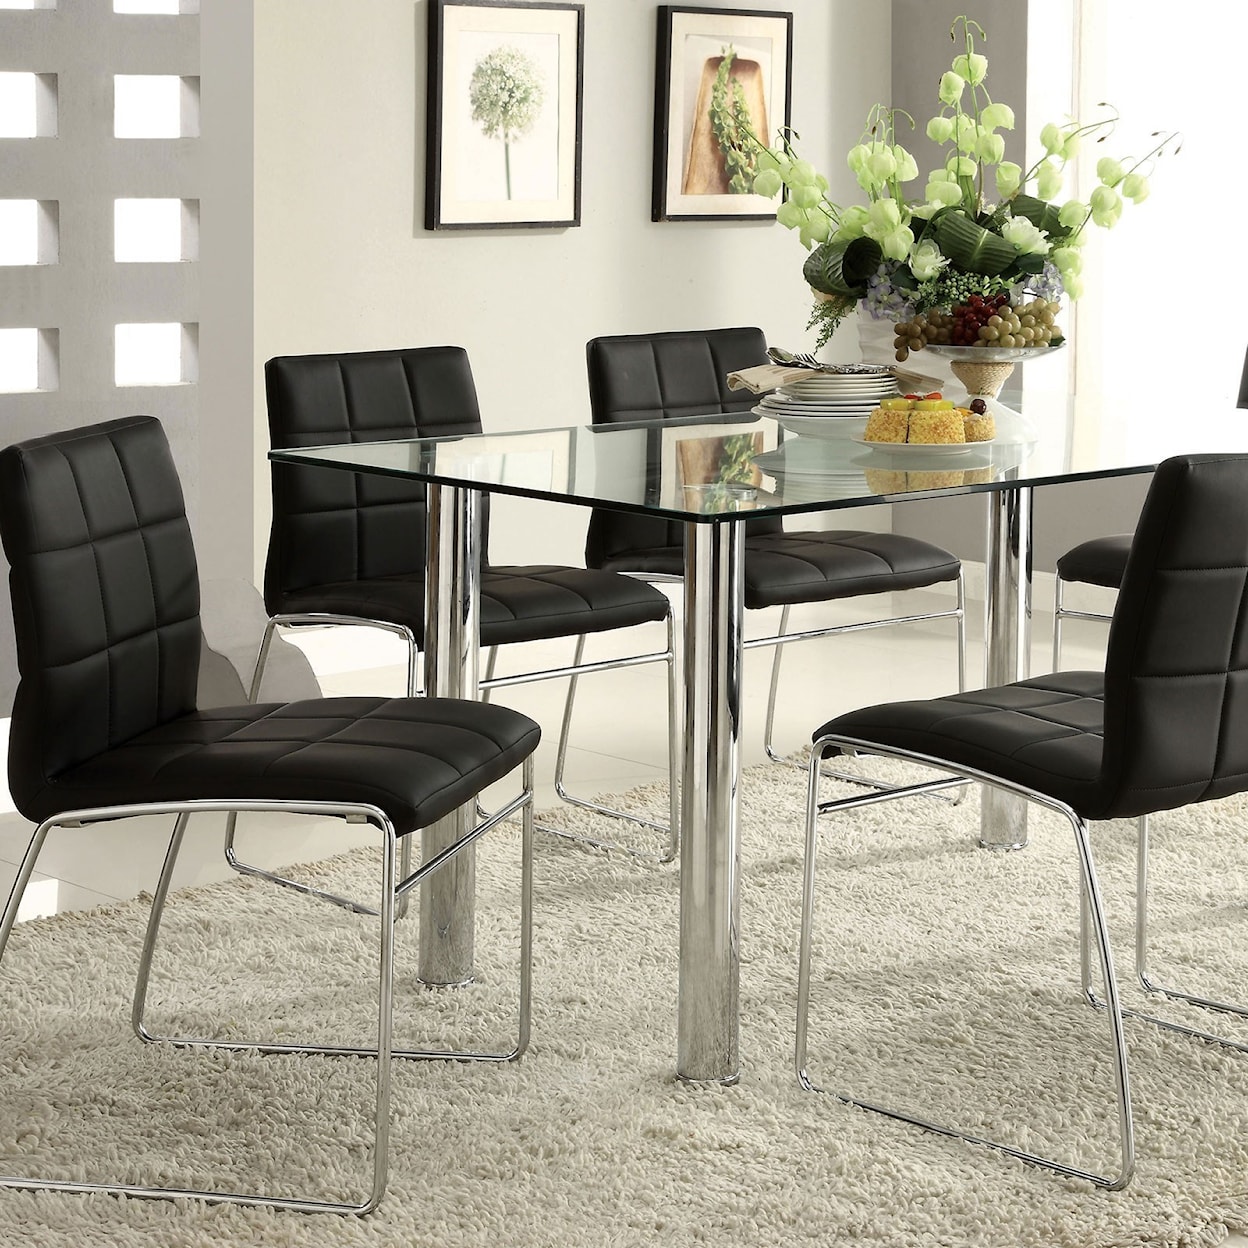 Furniture of America Kalawao Table and 6 Side Chairs